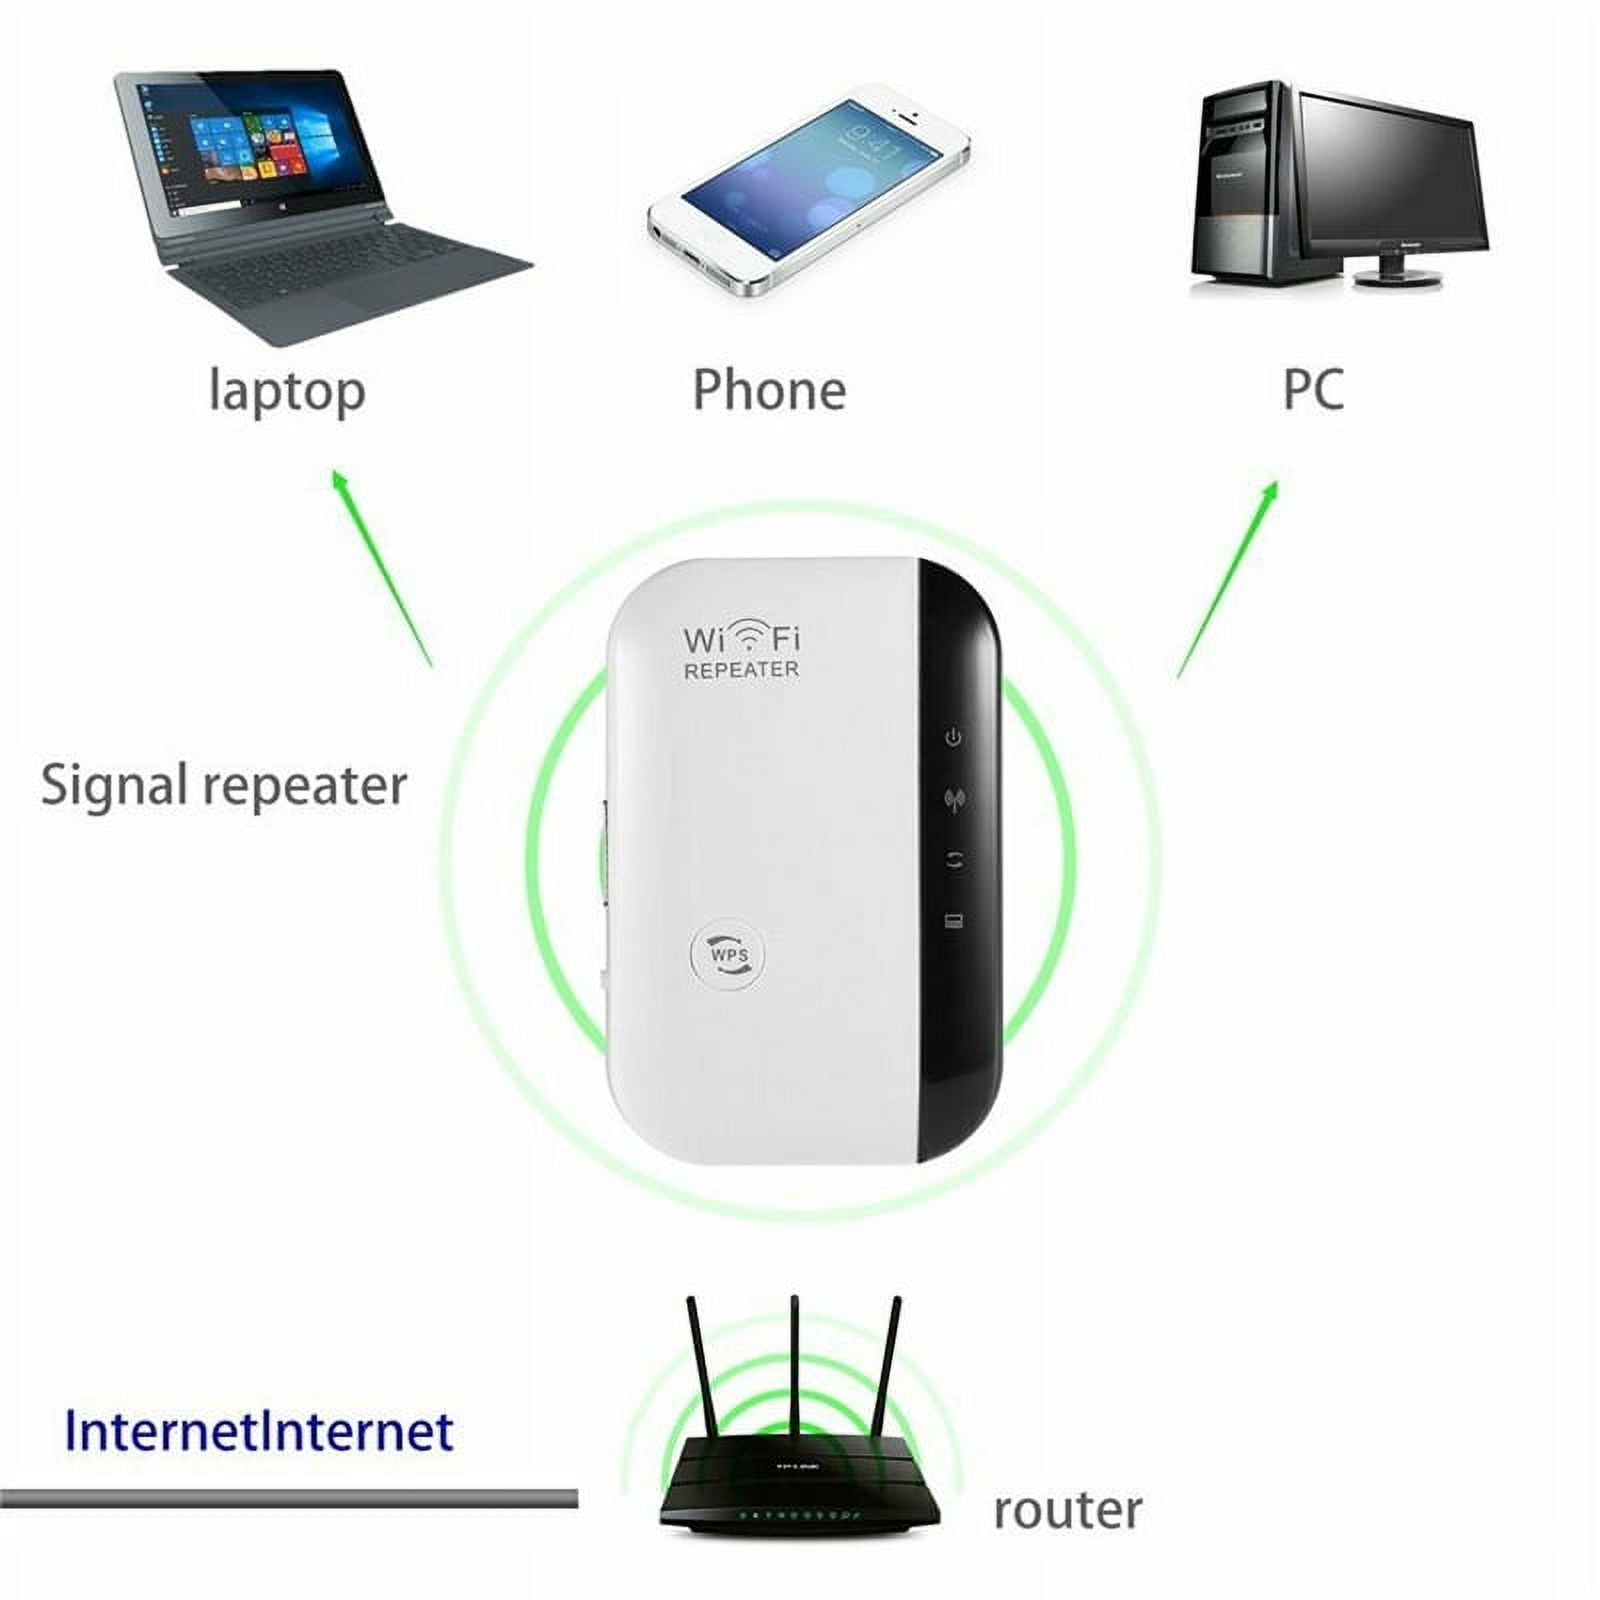 U10-300 Lightweight Repeater Wireless Router WiFi Booster 300Mbps WiFi  Repeater - White / US Plug Wholesale